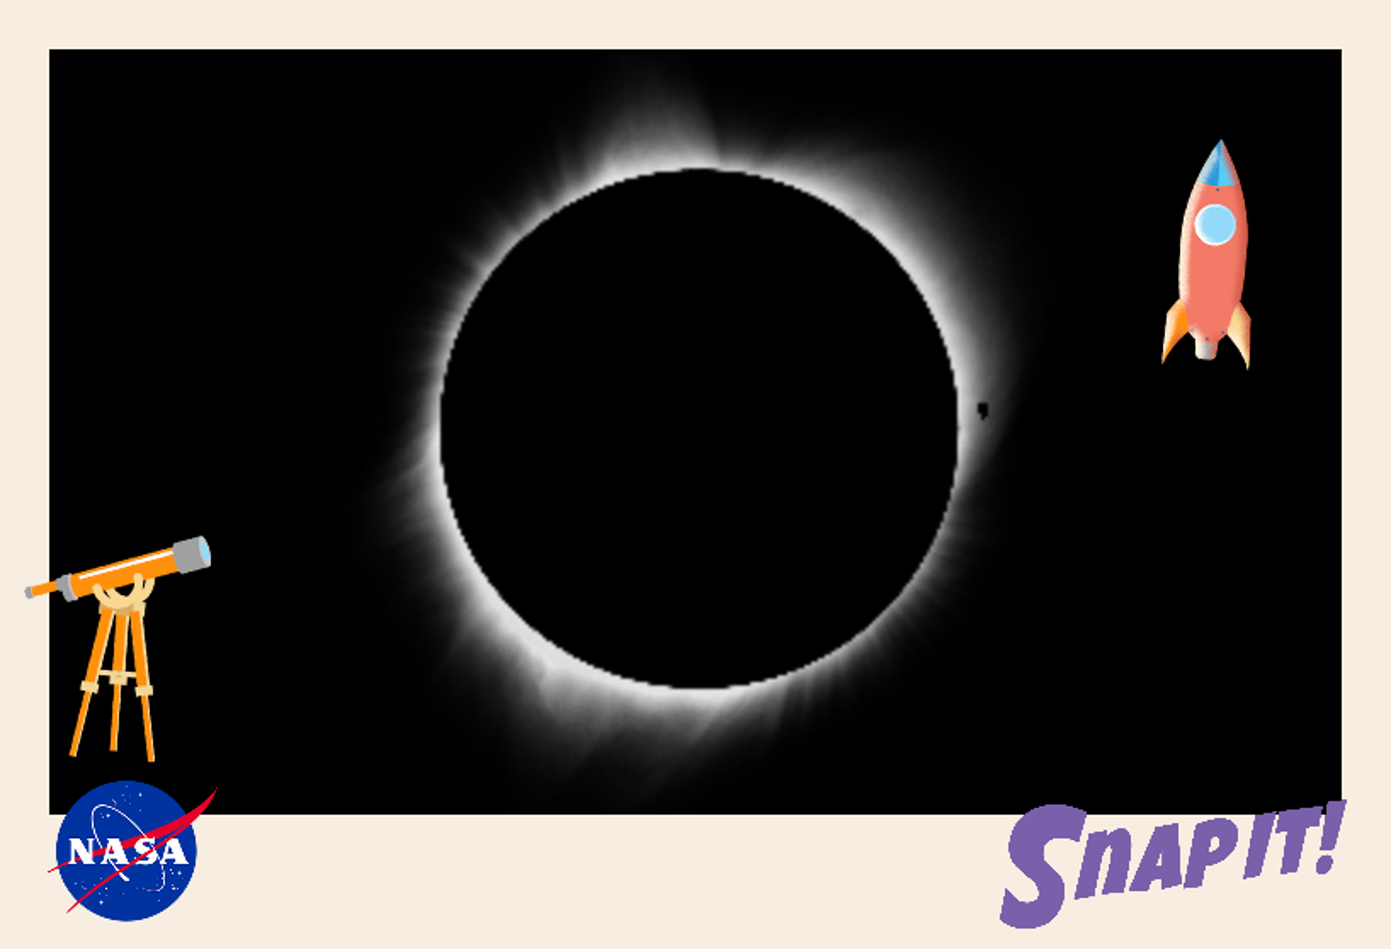 A postcard that show a large image a total solar eclipse in the middle – a black circle with the Sun's white wispy corona flowing out. There is a cartoon telescope on the bottom left and a cartoon rocket on the top right. On the bottom left, there is also the NASA insignia. On the bottom right, it says "Snap It!" in stylized purple text.